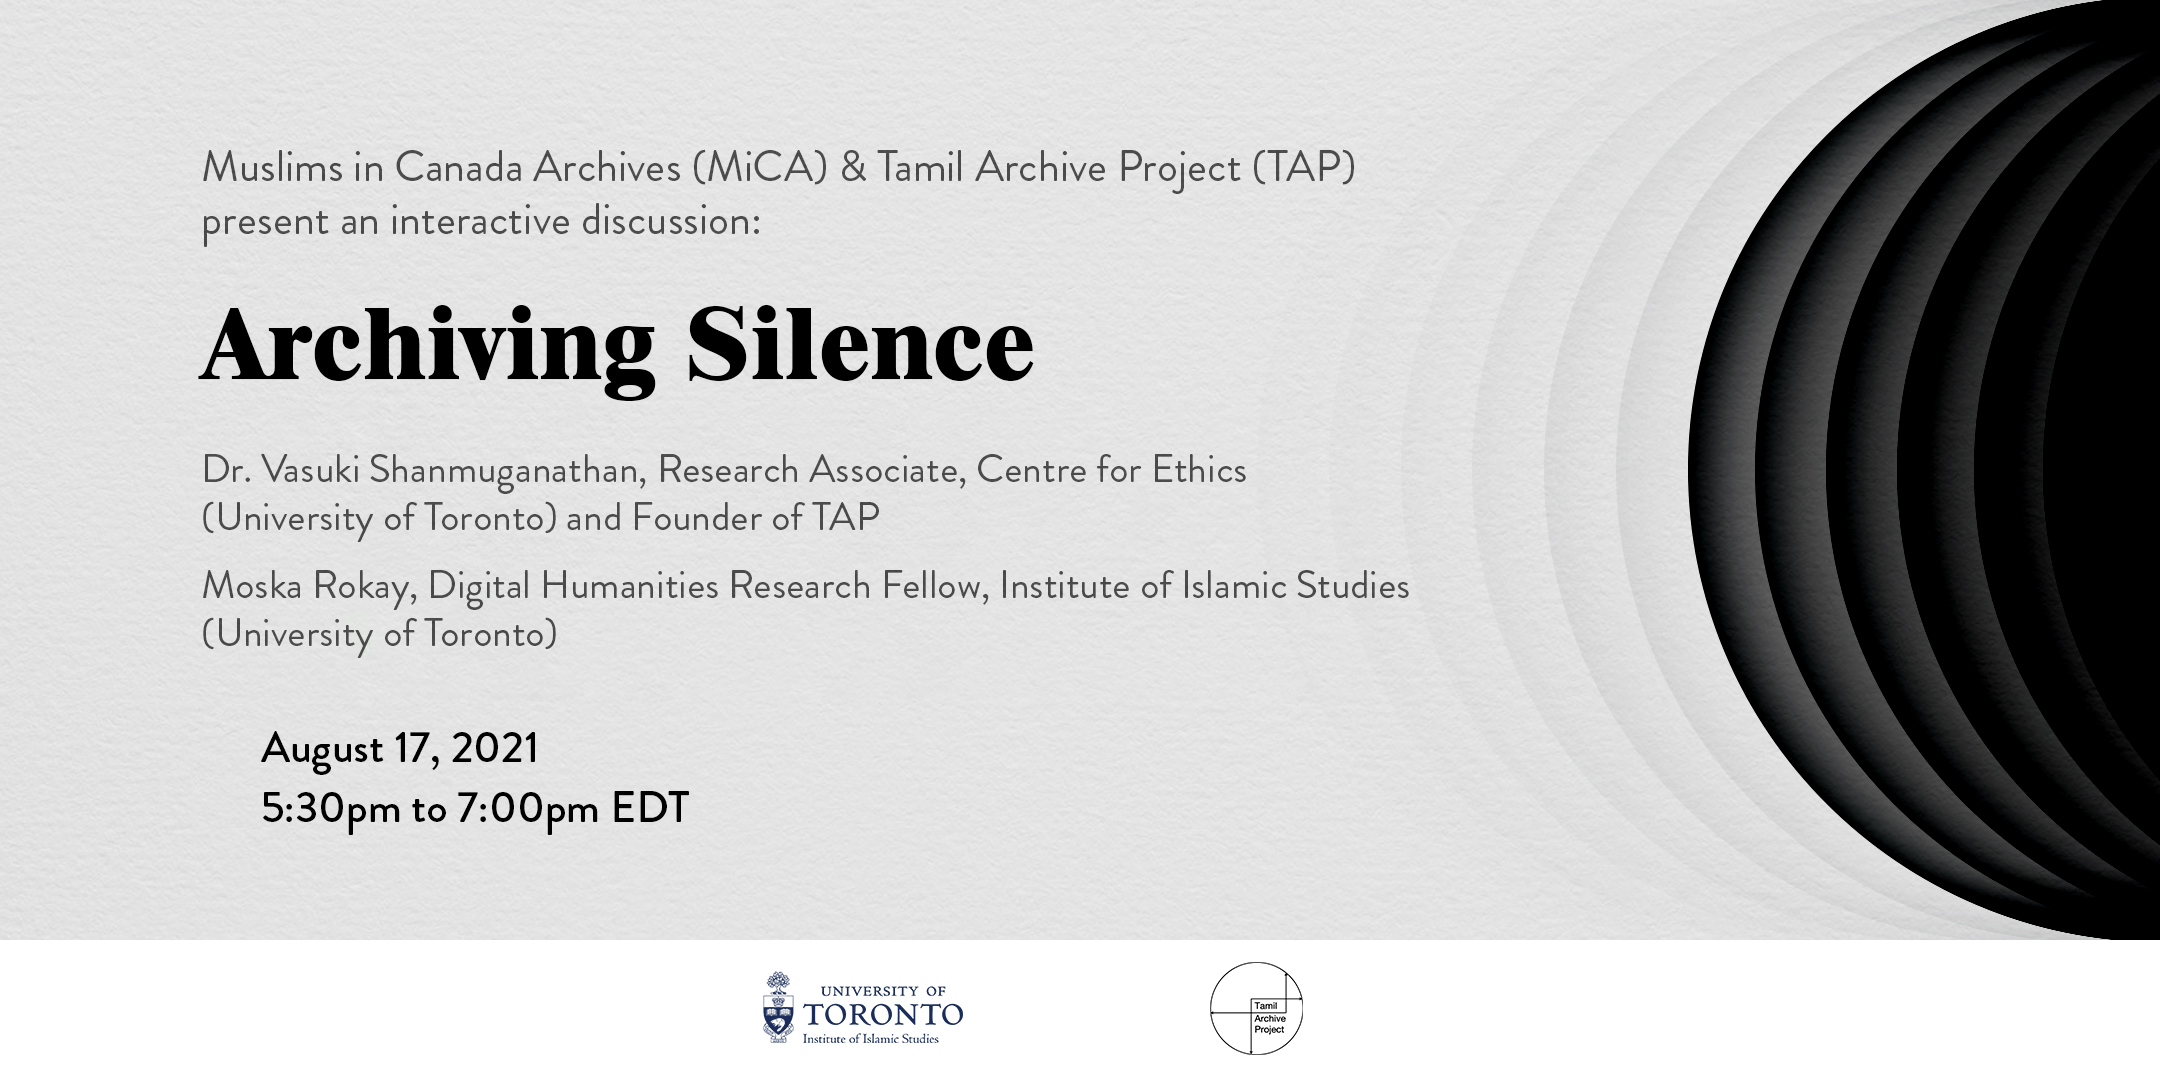 Muslims in Canada Archives & Tamil Archive Project: Archiving Silence